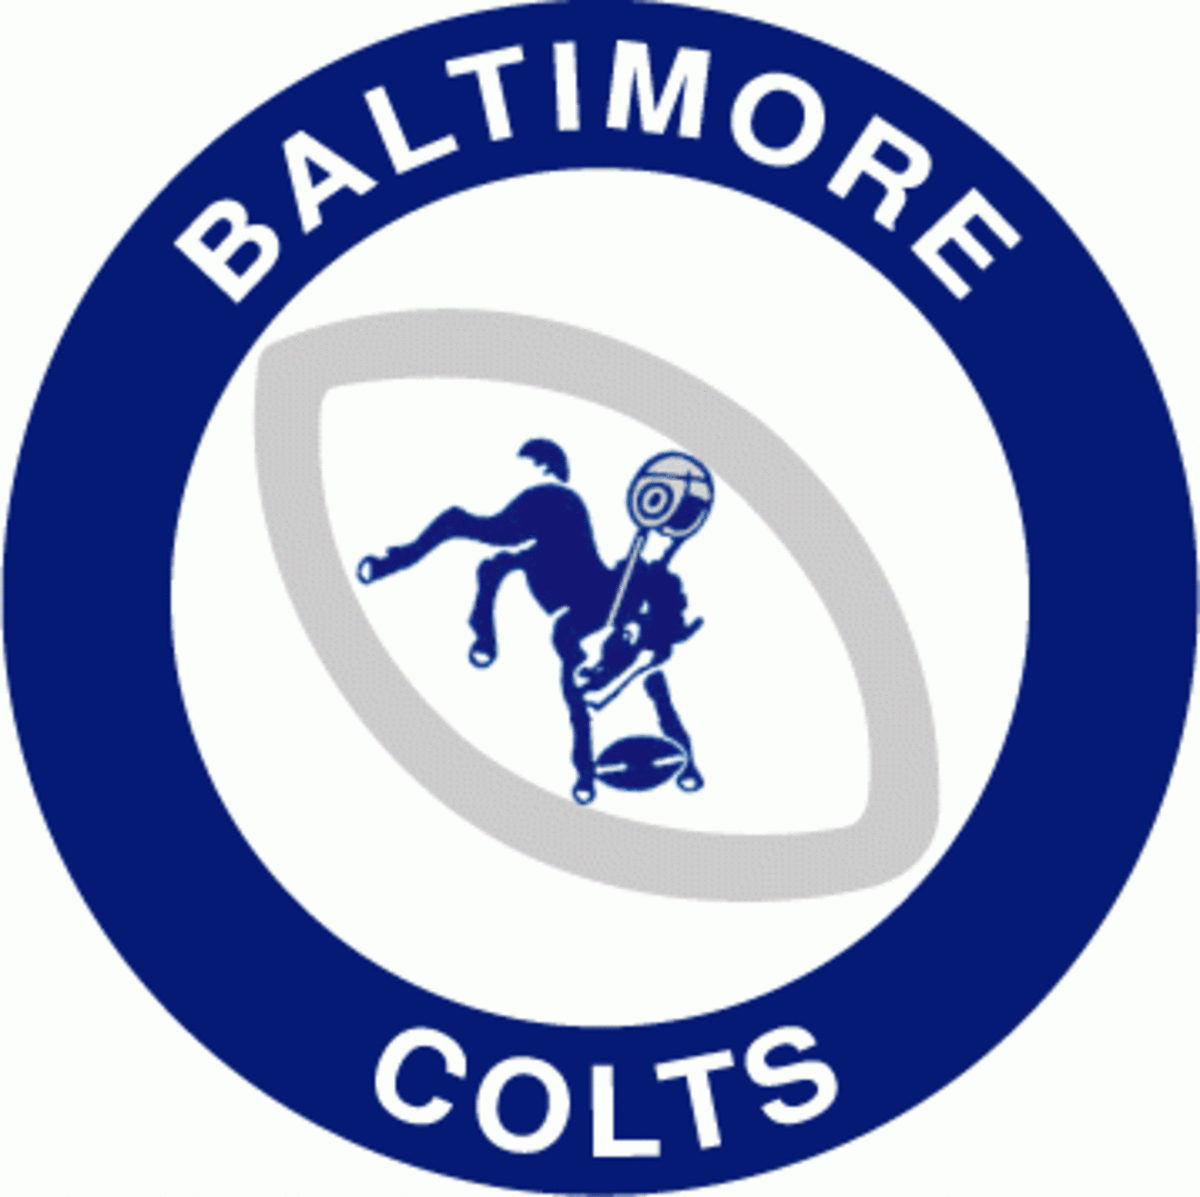 In 1958, the Baltimore Colts were the NFL champs.